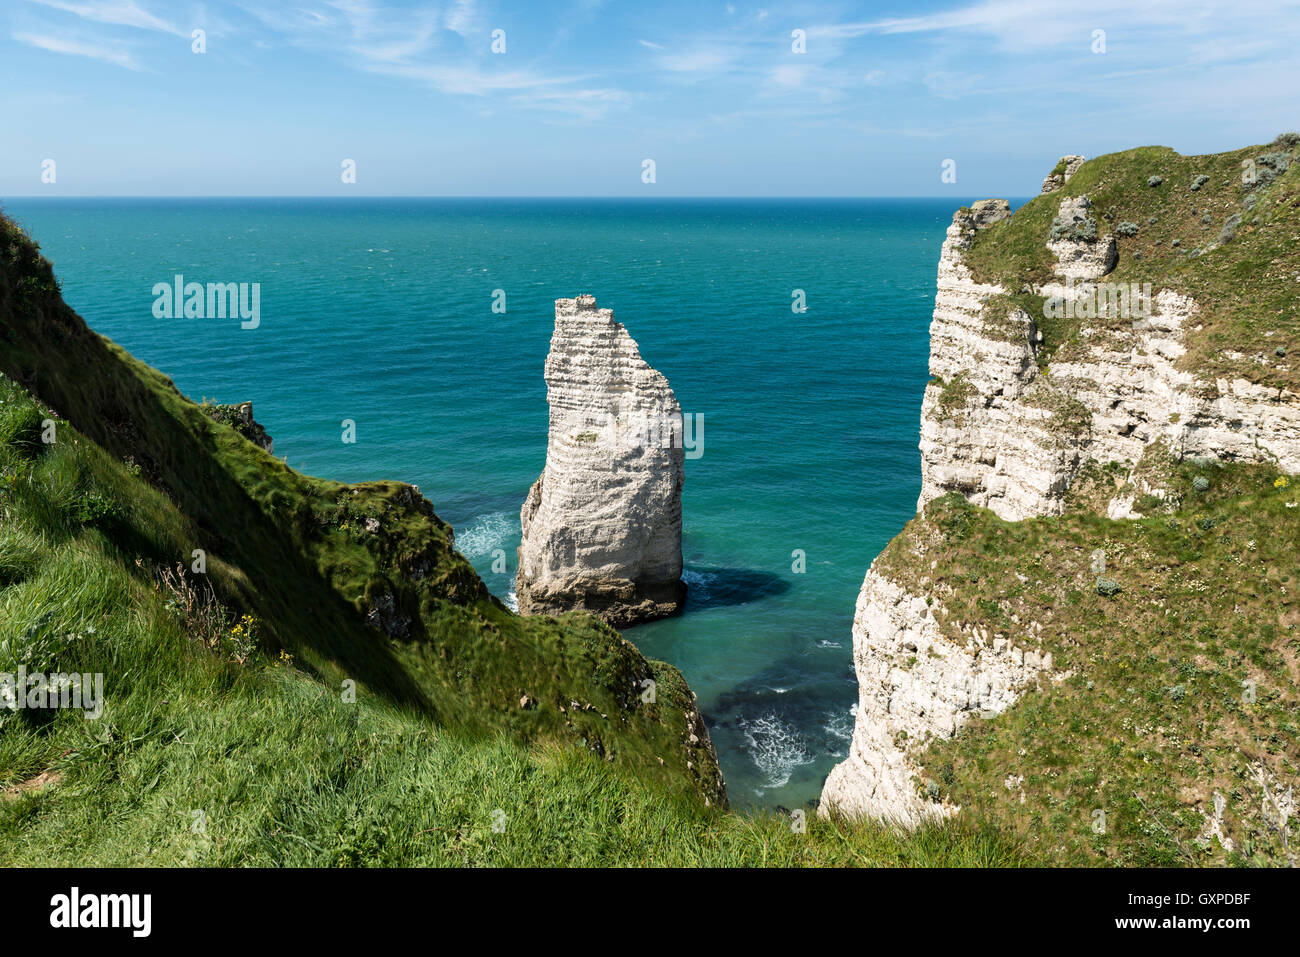 Scenic view of the famous cliffs of Etretat in Normandy, France Stock Photo